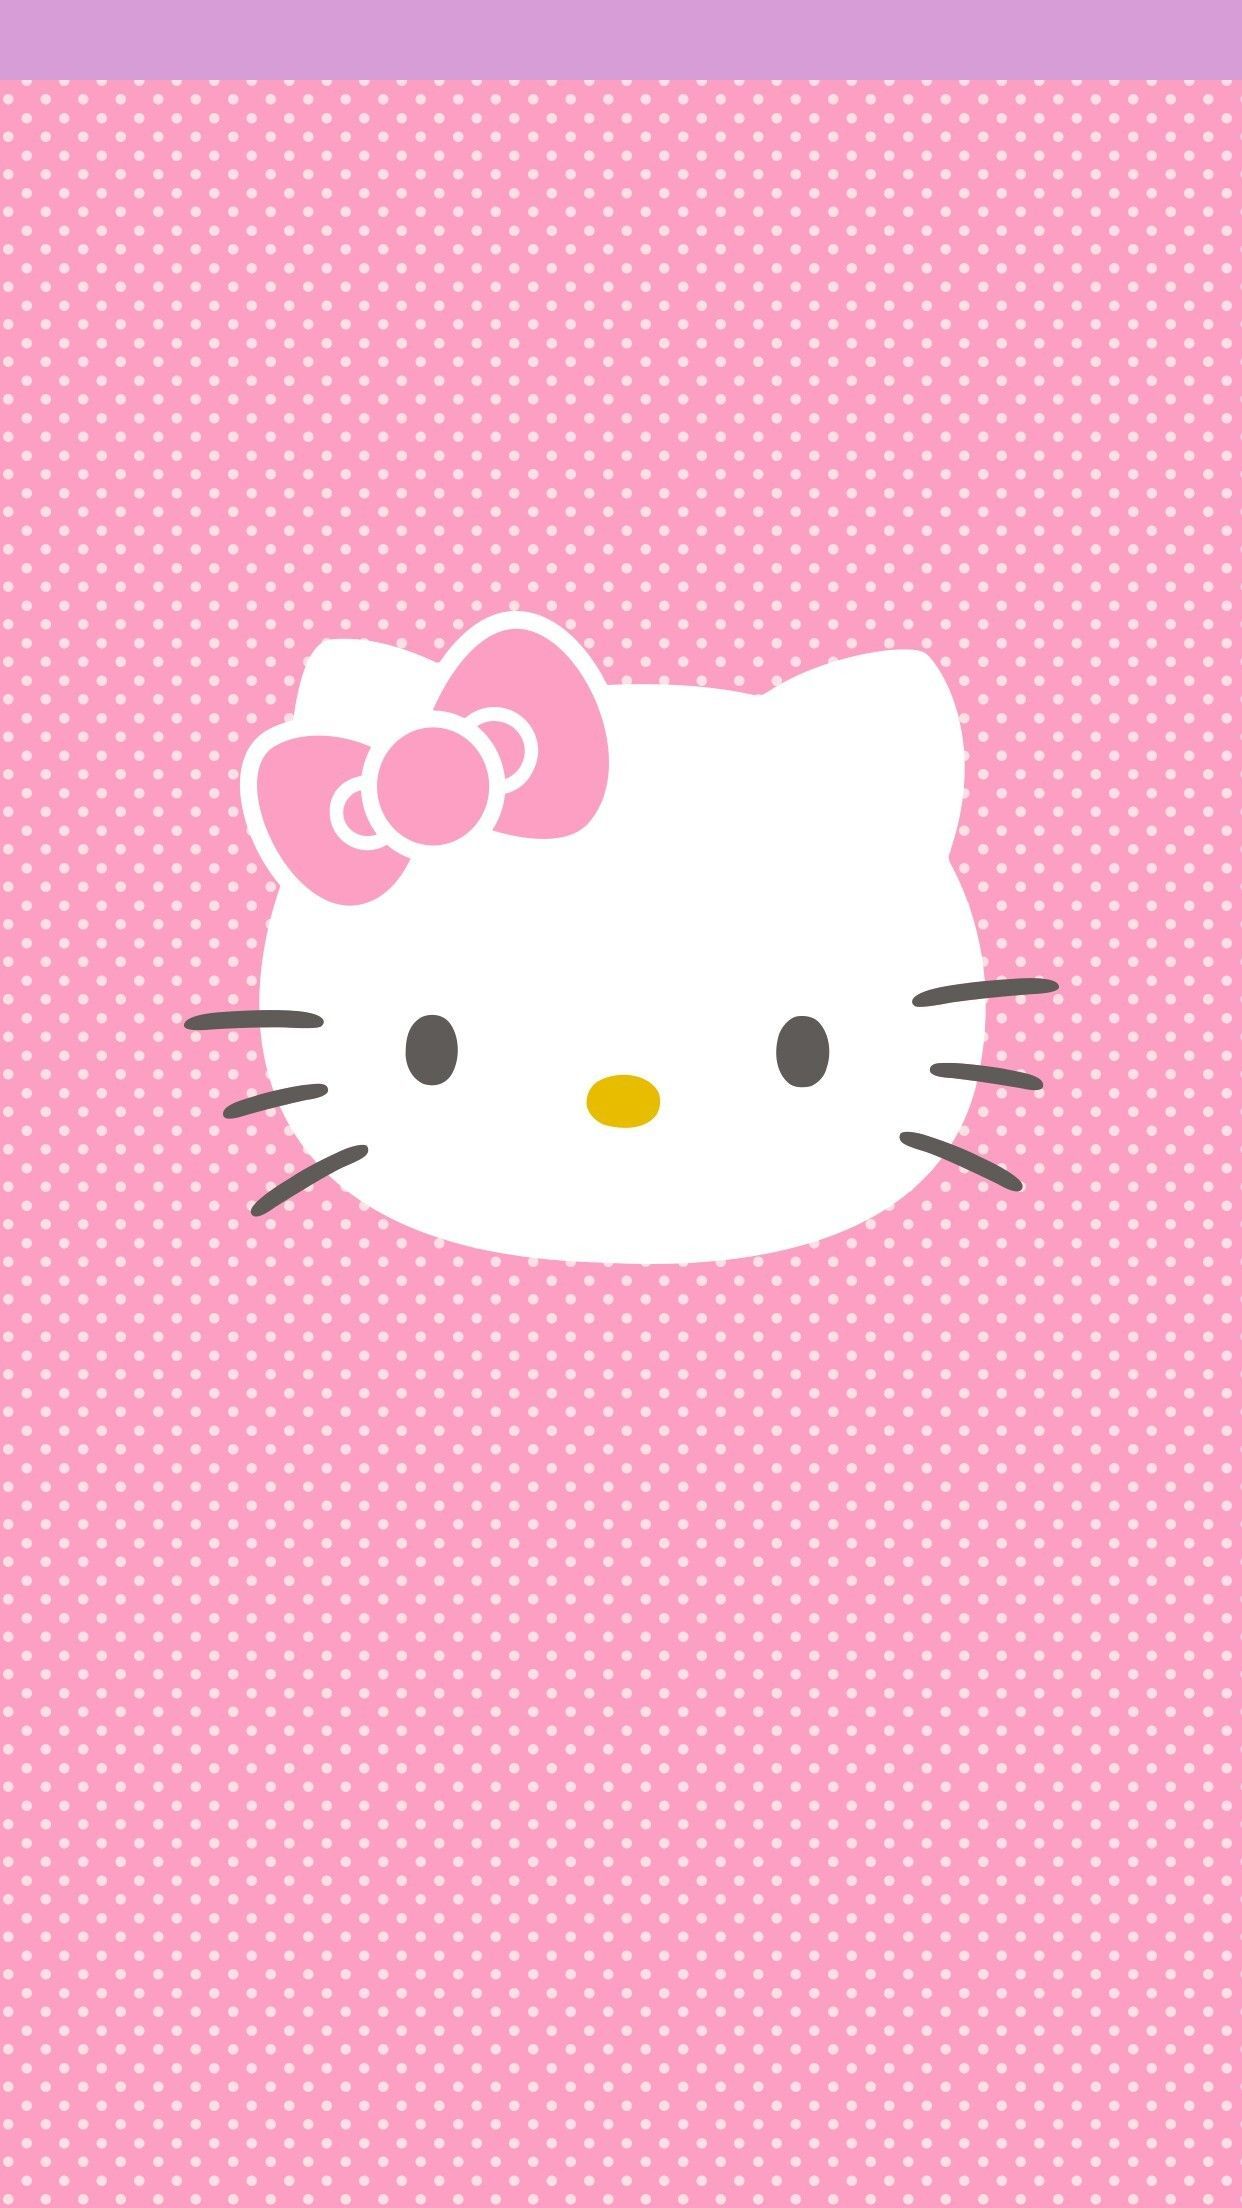 3D AndroidWallpaper - Hello Kitty Pictures Wallpaper Android   #HelloKittyPicturesWallpapers #1080 #1920 #Android # Hello